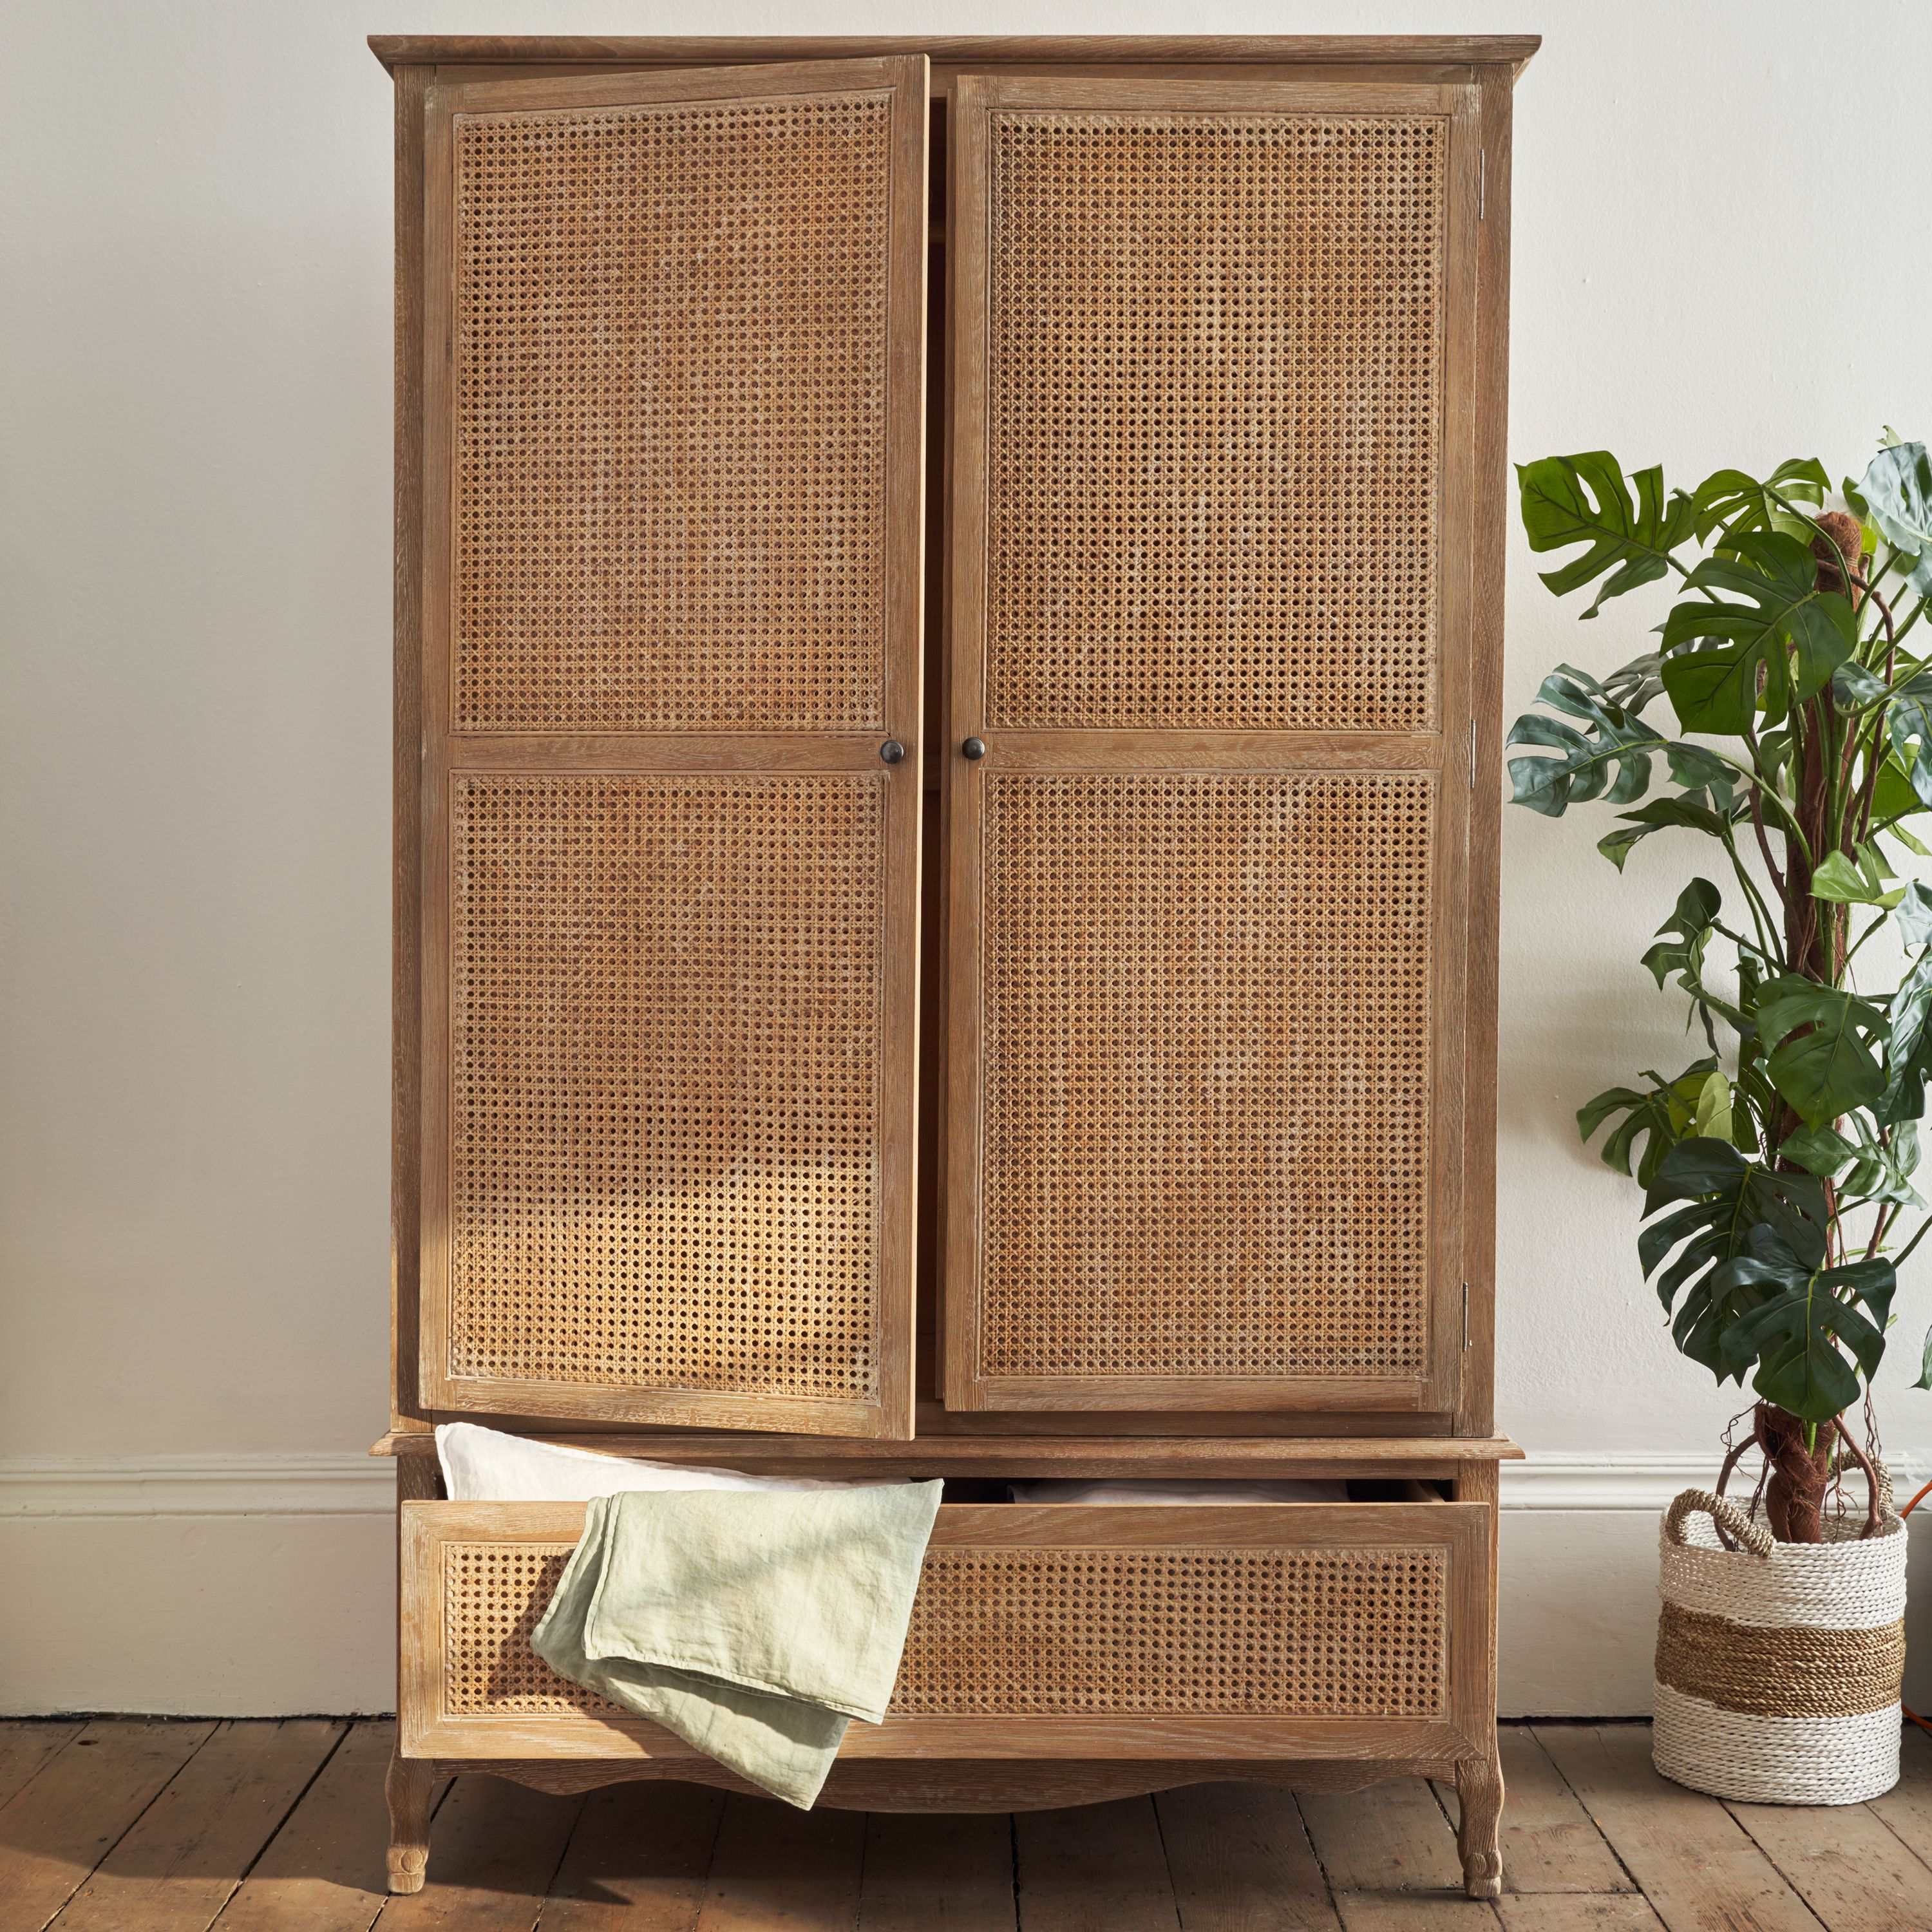 Sienna Rattan Wardrobe | Feather & Black Intended For Rattan Wardrobes (View 15 of 20)